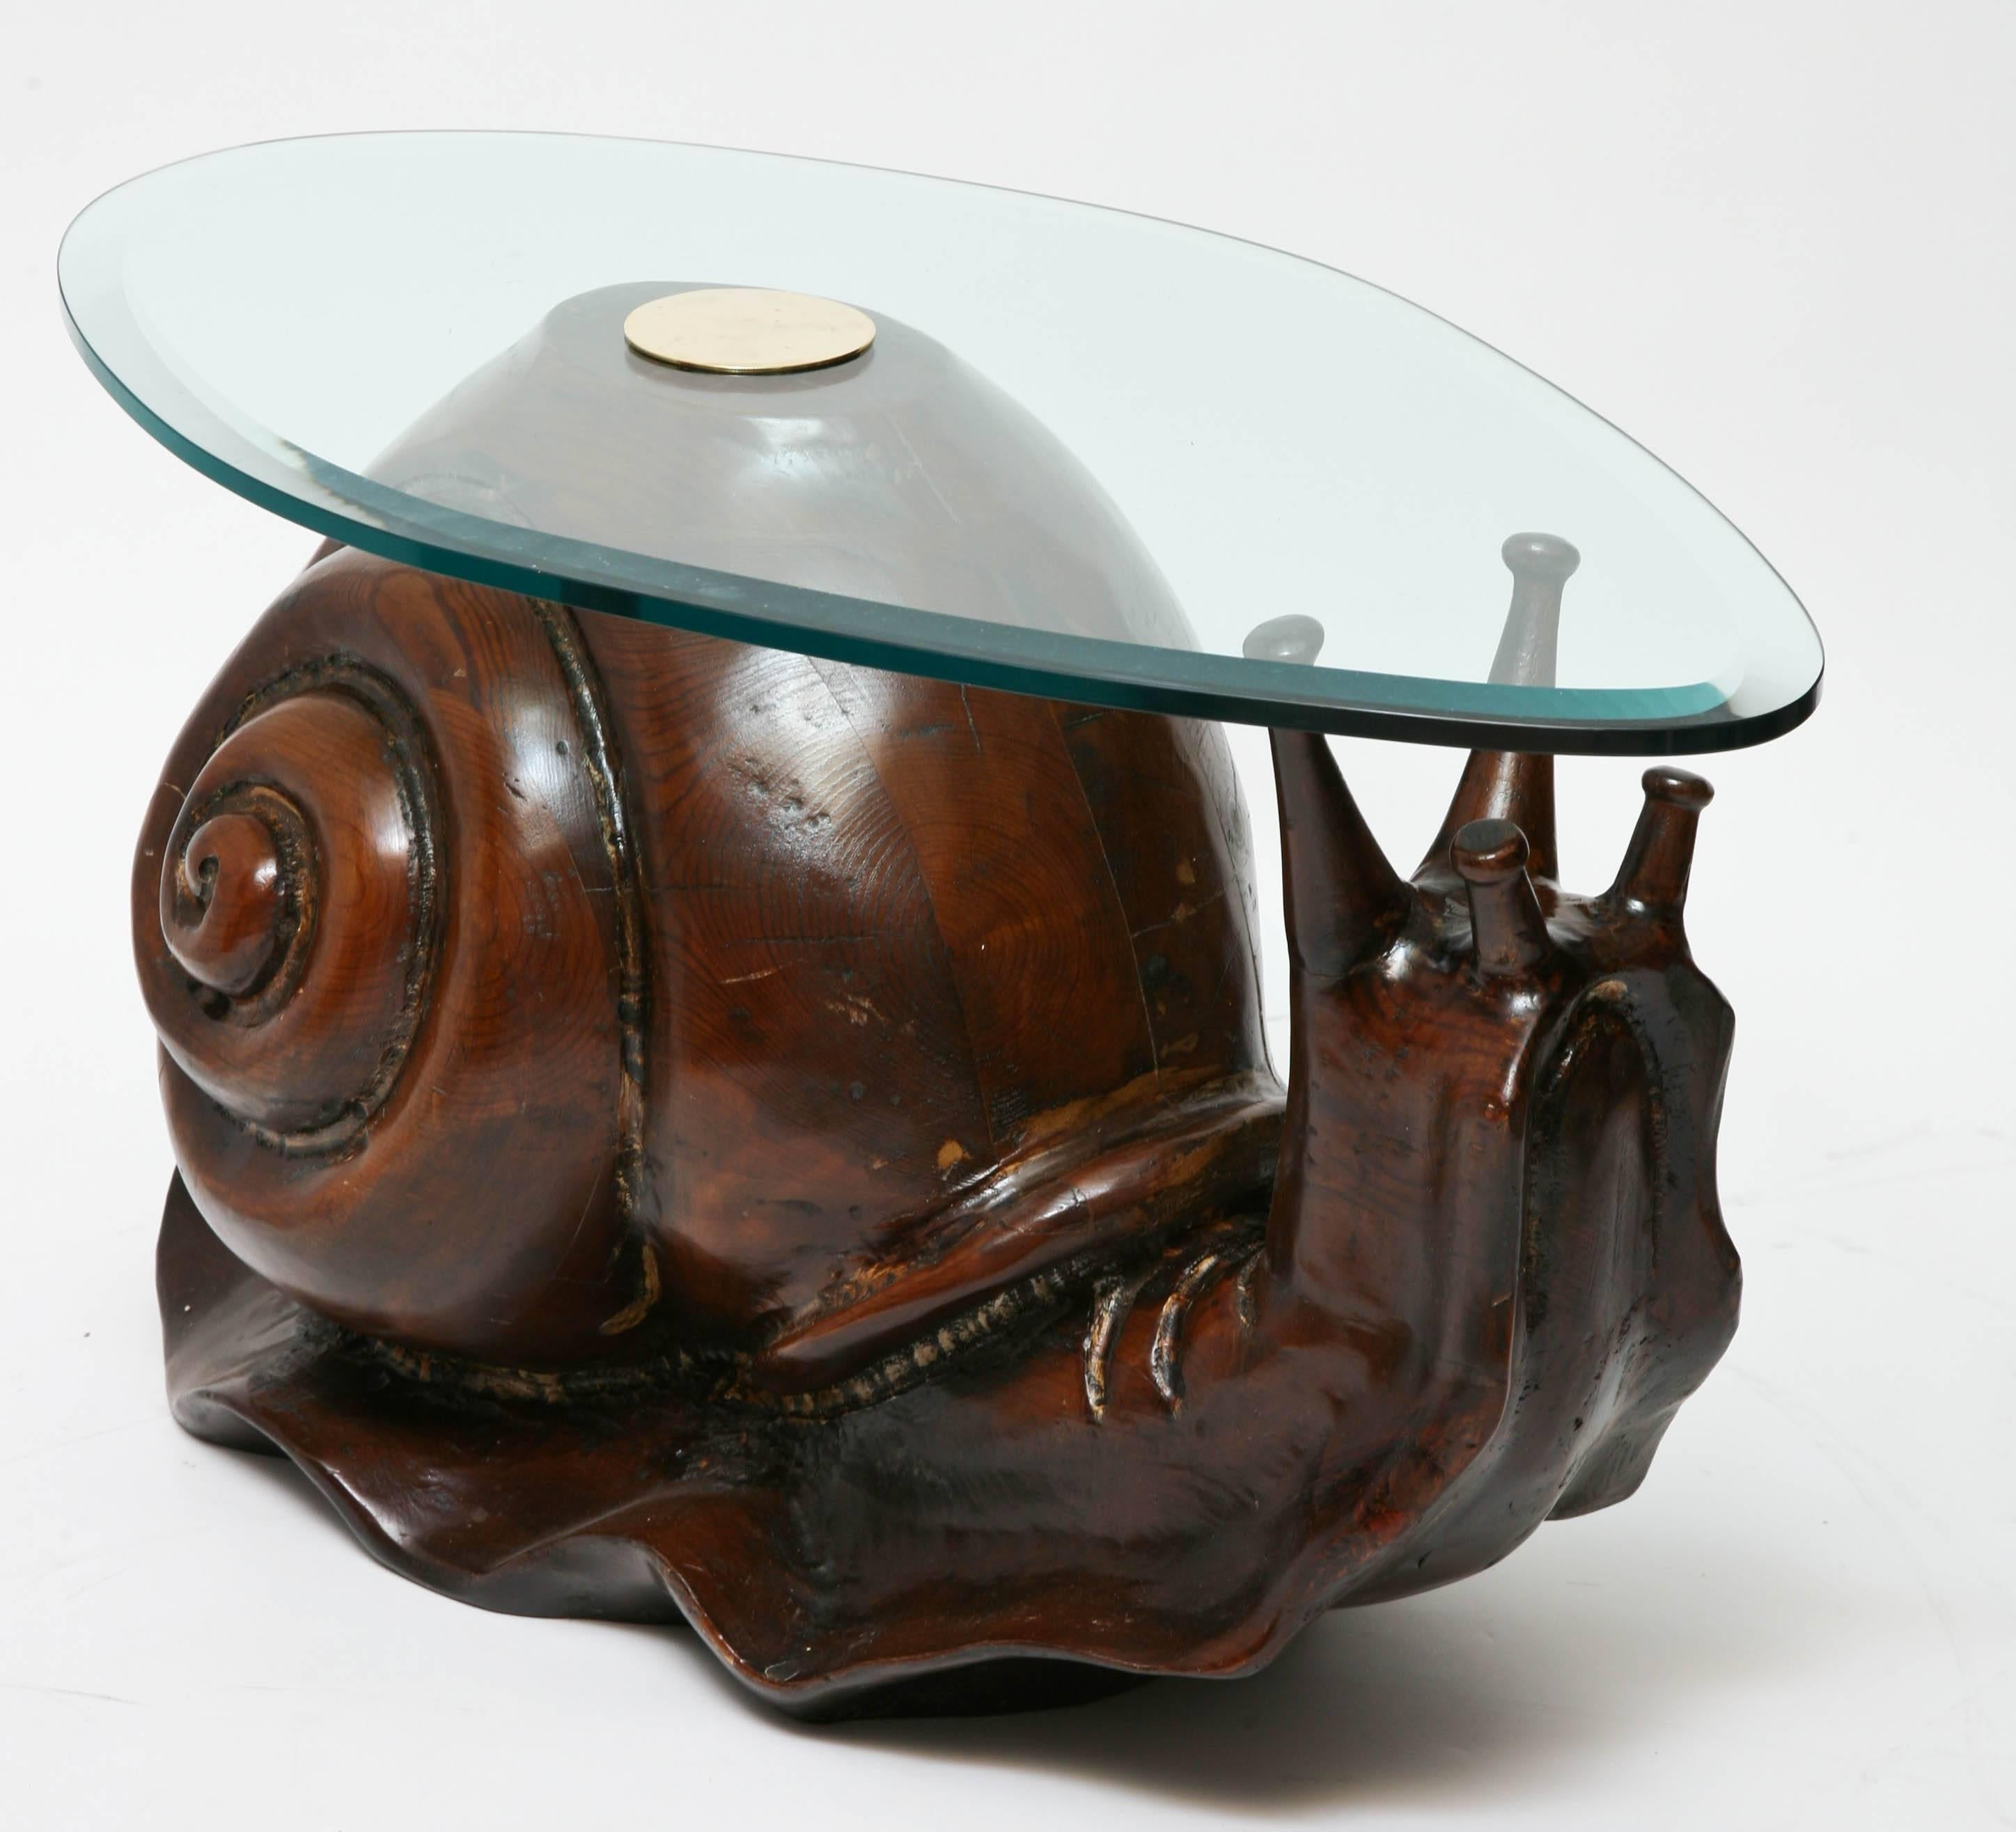 Whimsical carved dark wood snail sculpture with glass top for use as coffee or side table.